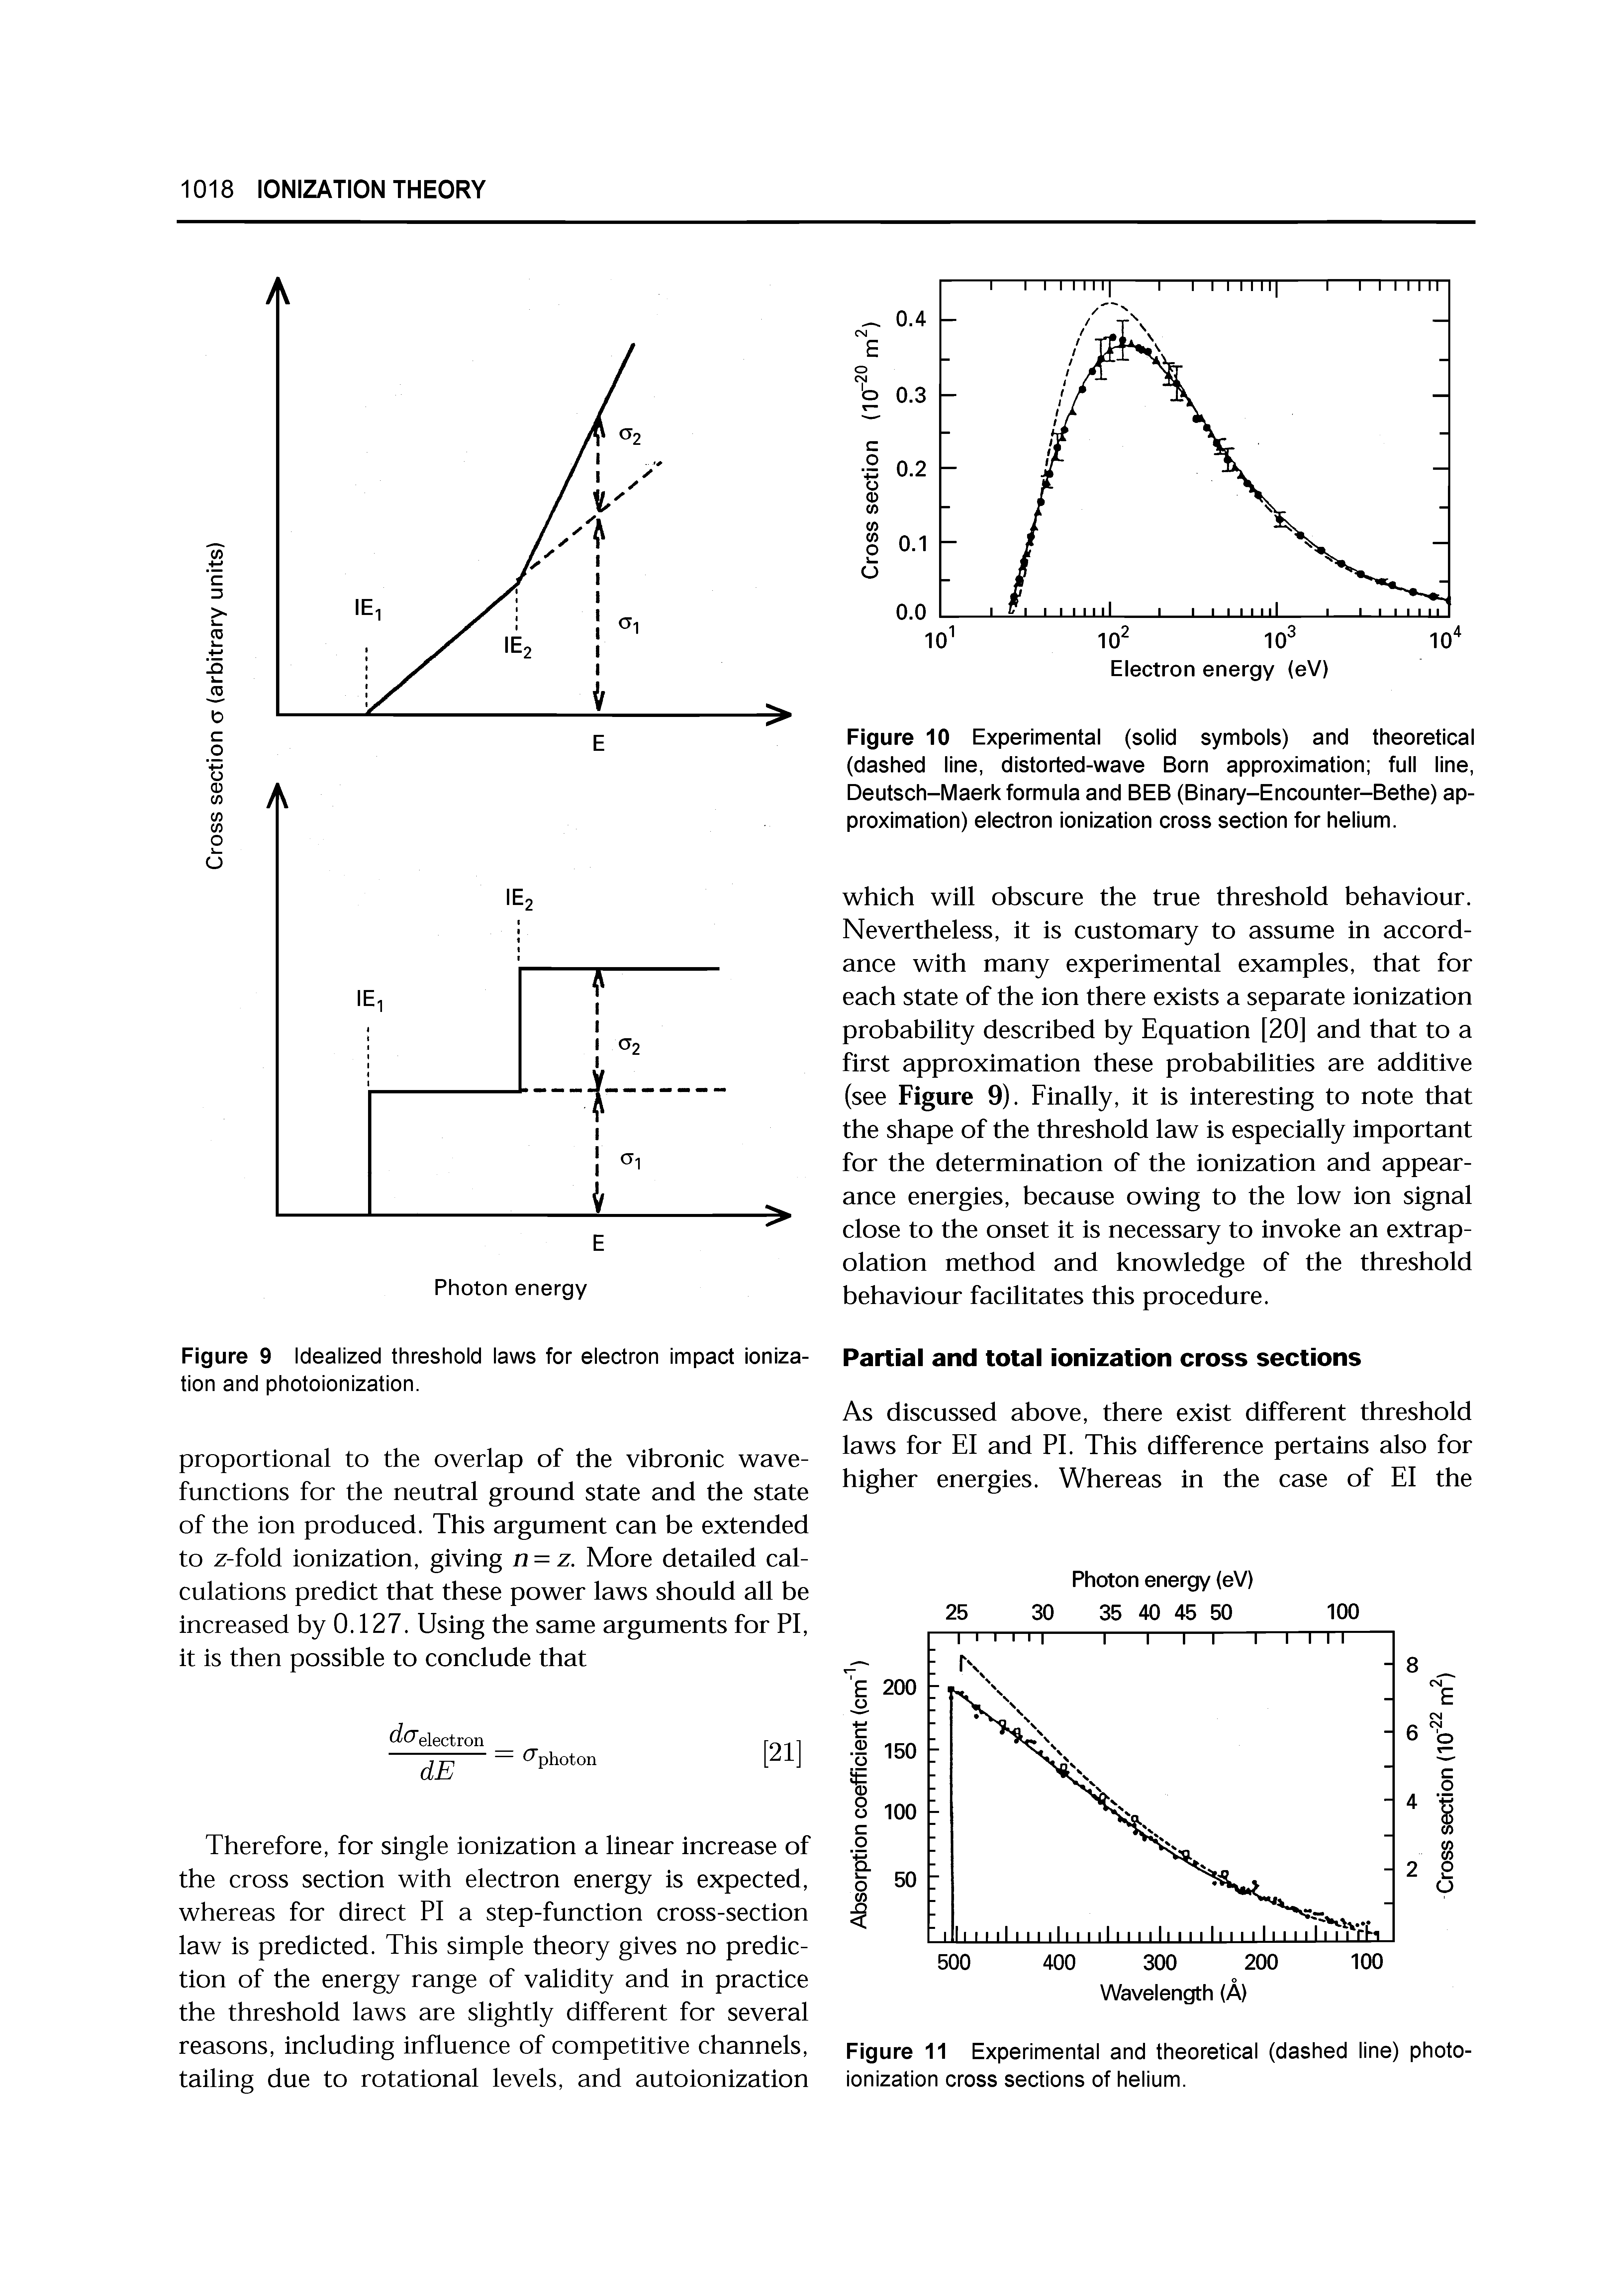 Figure 11 Experimental and theoretical (dashed line) photoionization cross sections of helium.